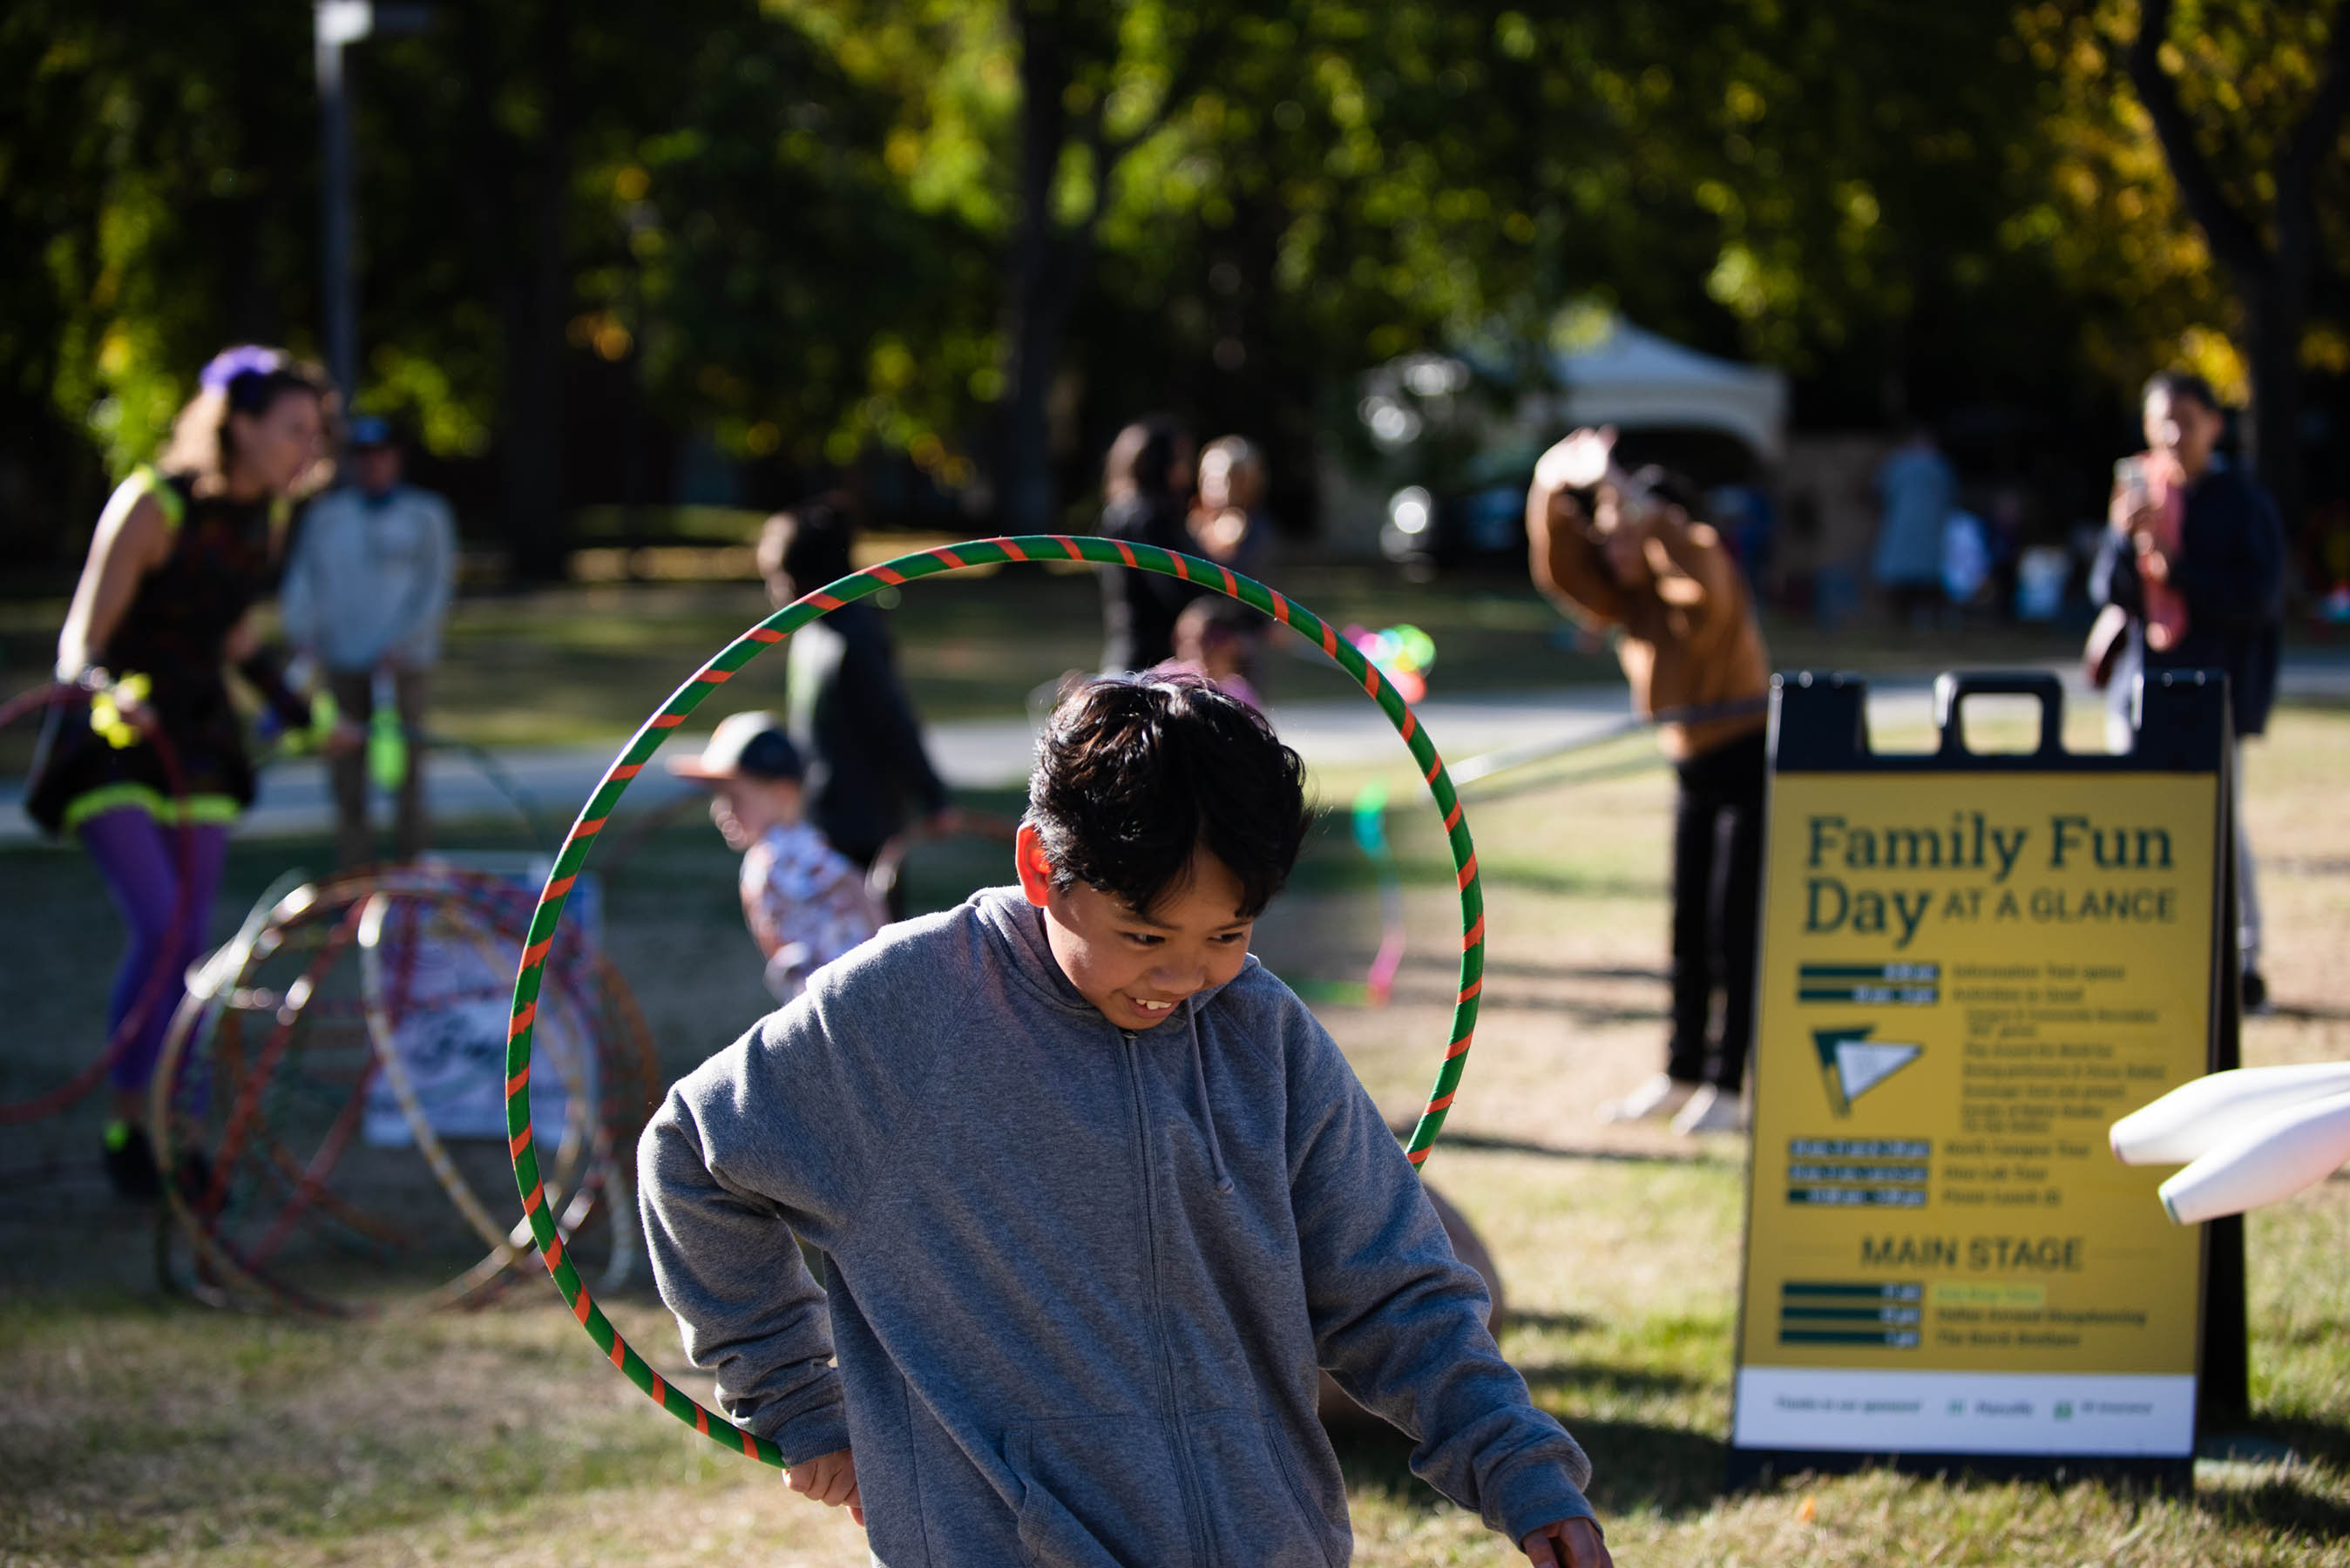 Guests enjoy games and activities at the Family Fun Day on North Campus Quad